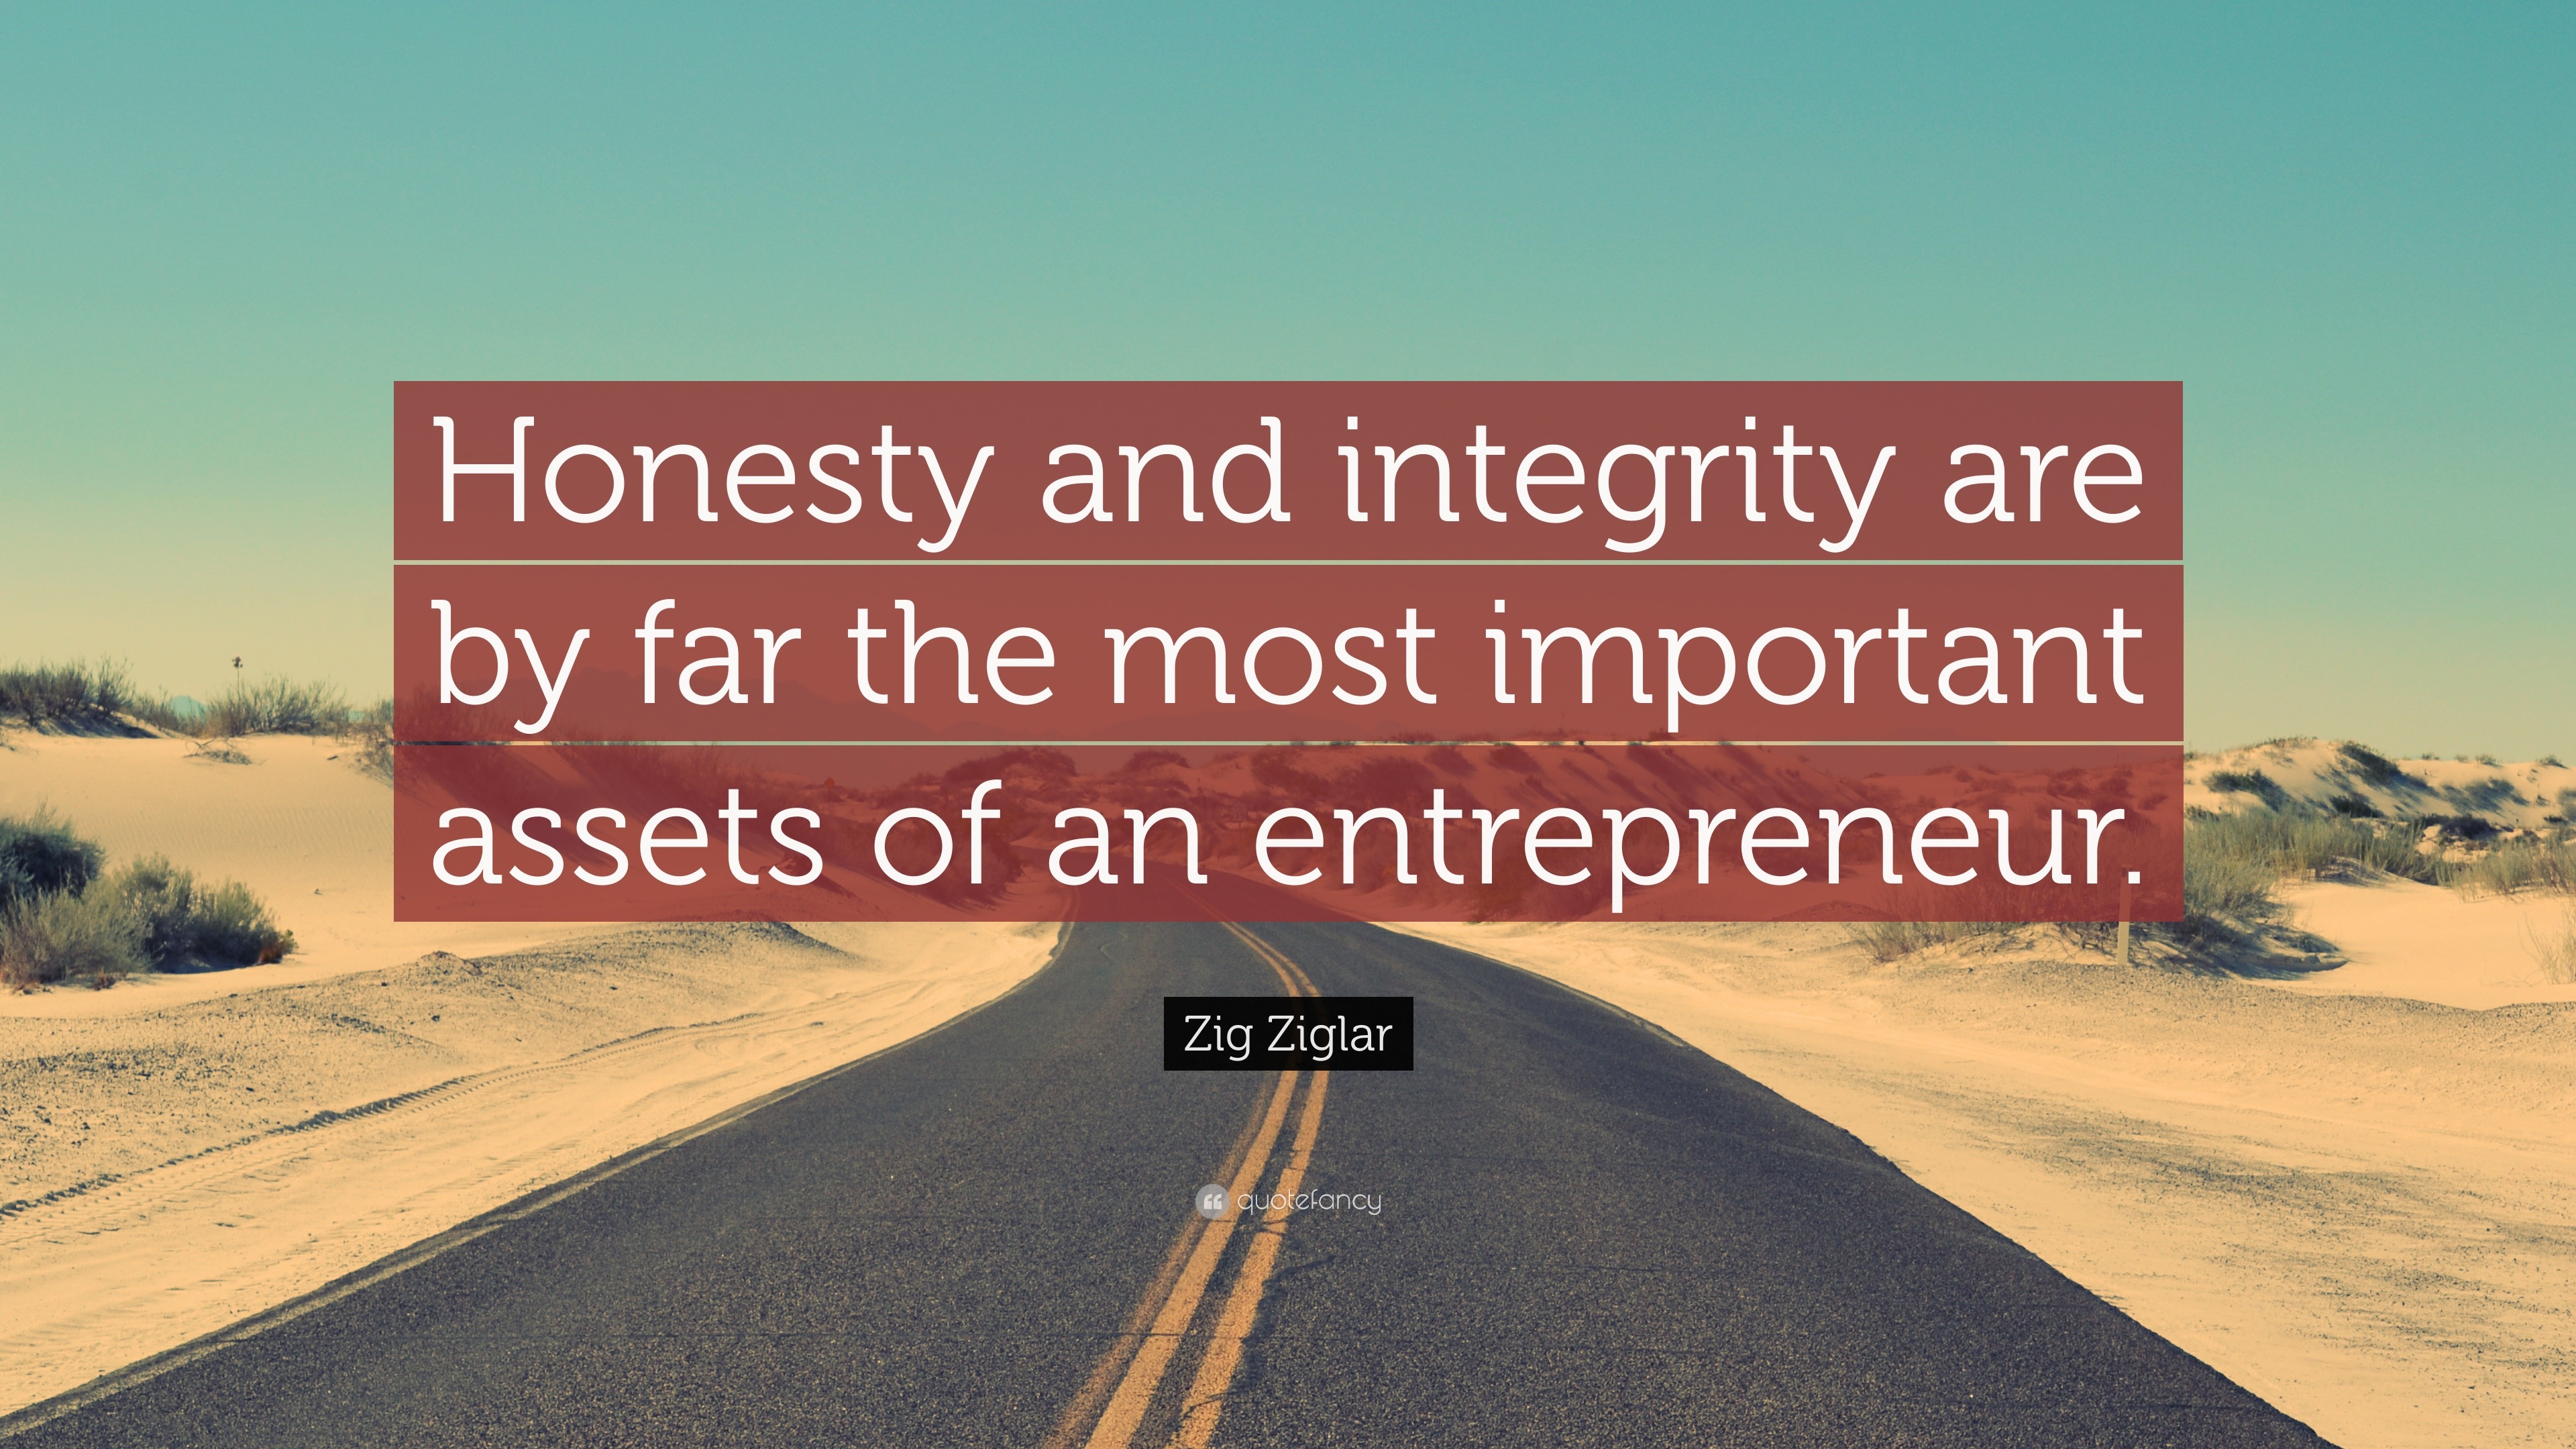 Zig Ziglar Quote: “Honesty and integrity are by far the most important